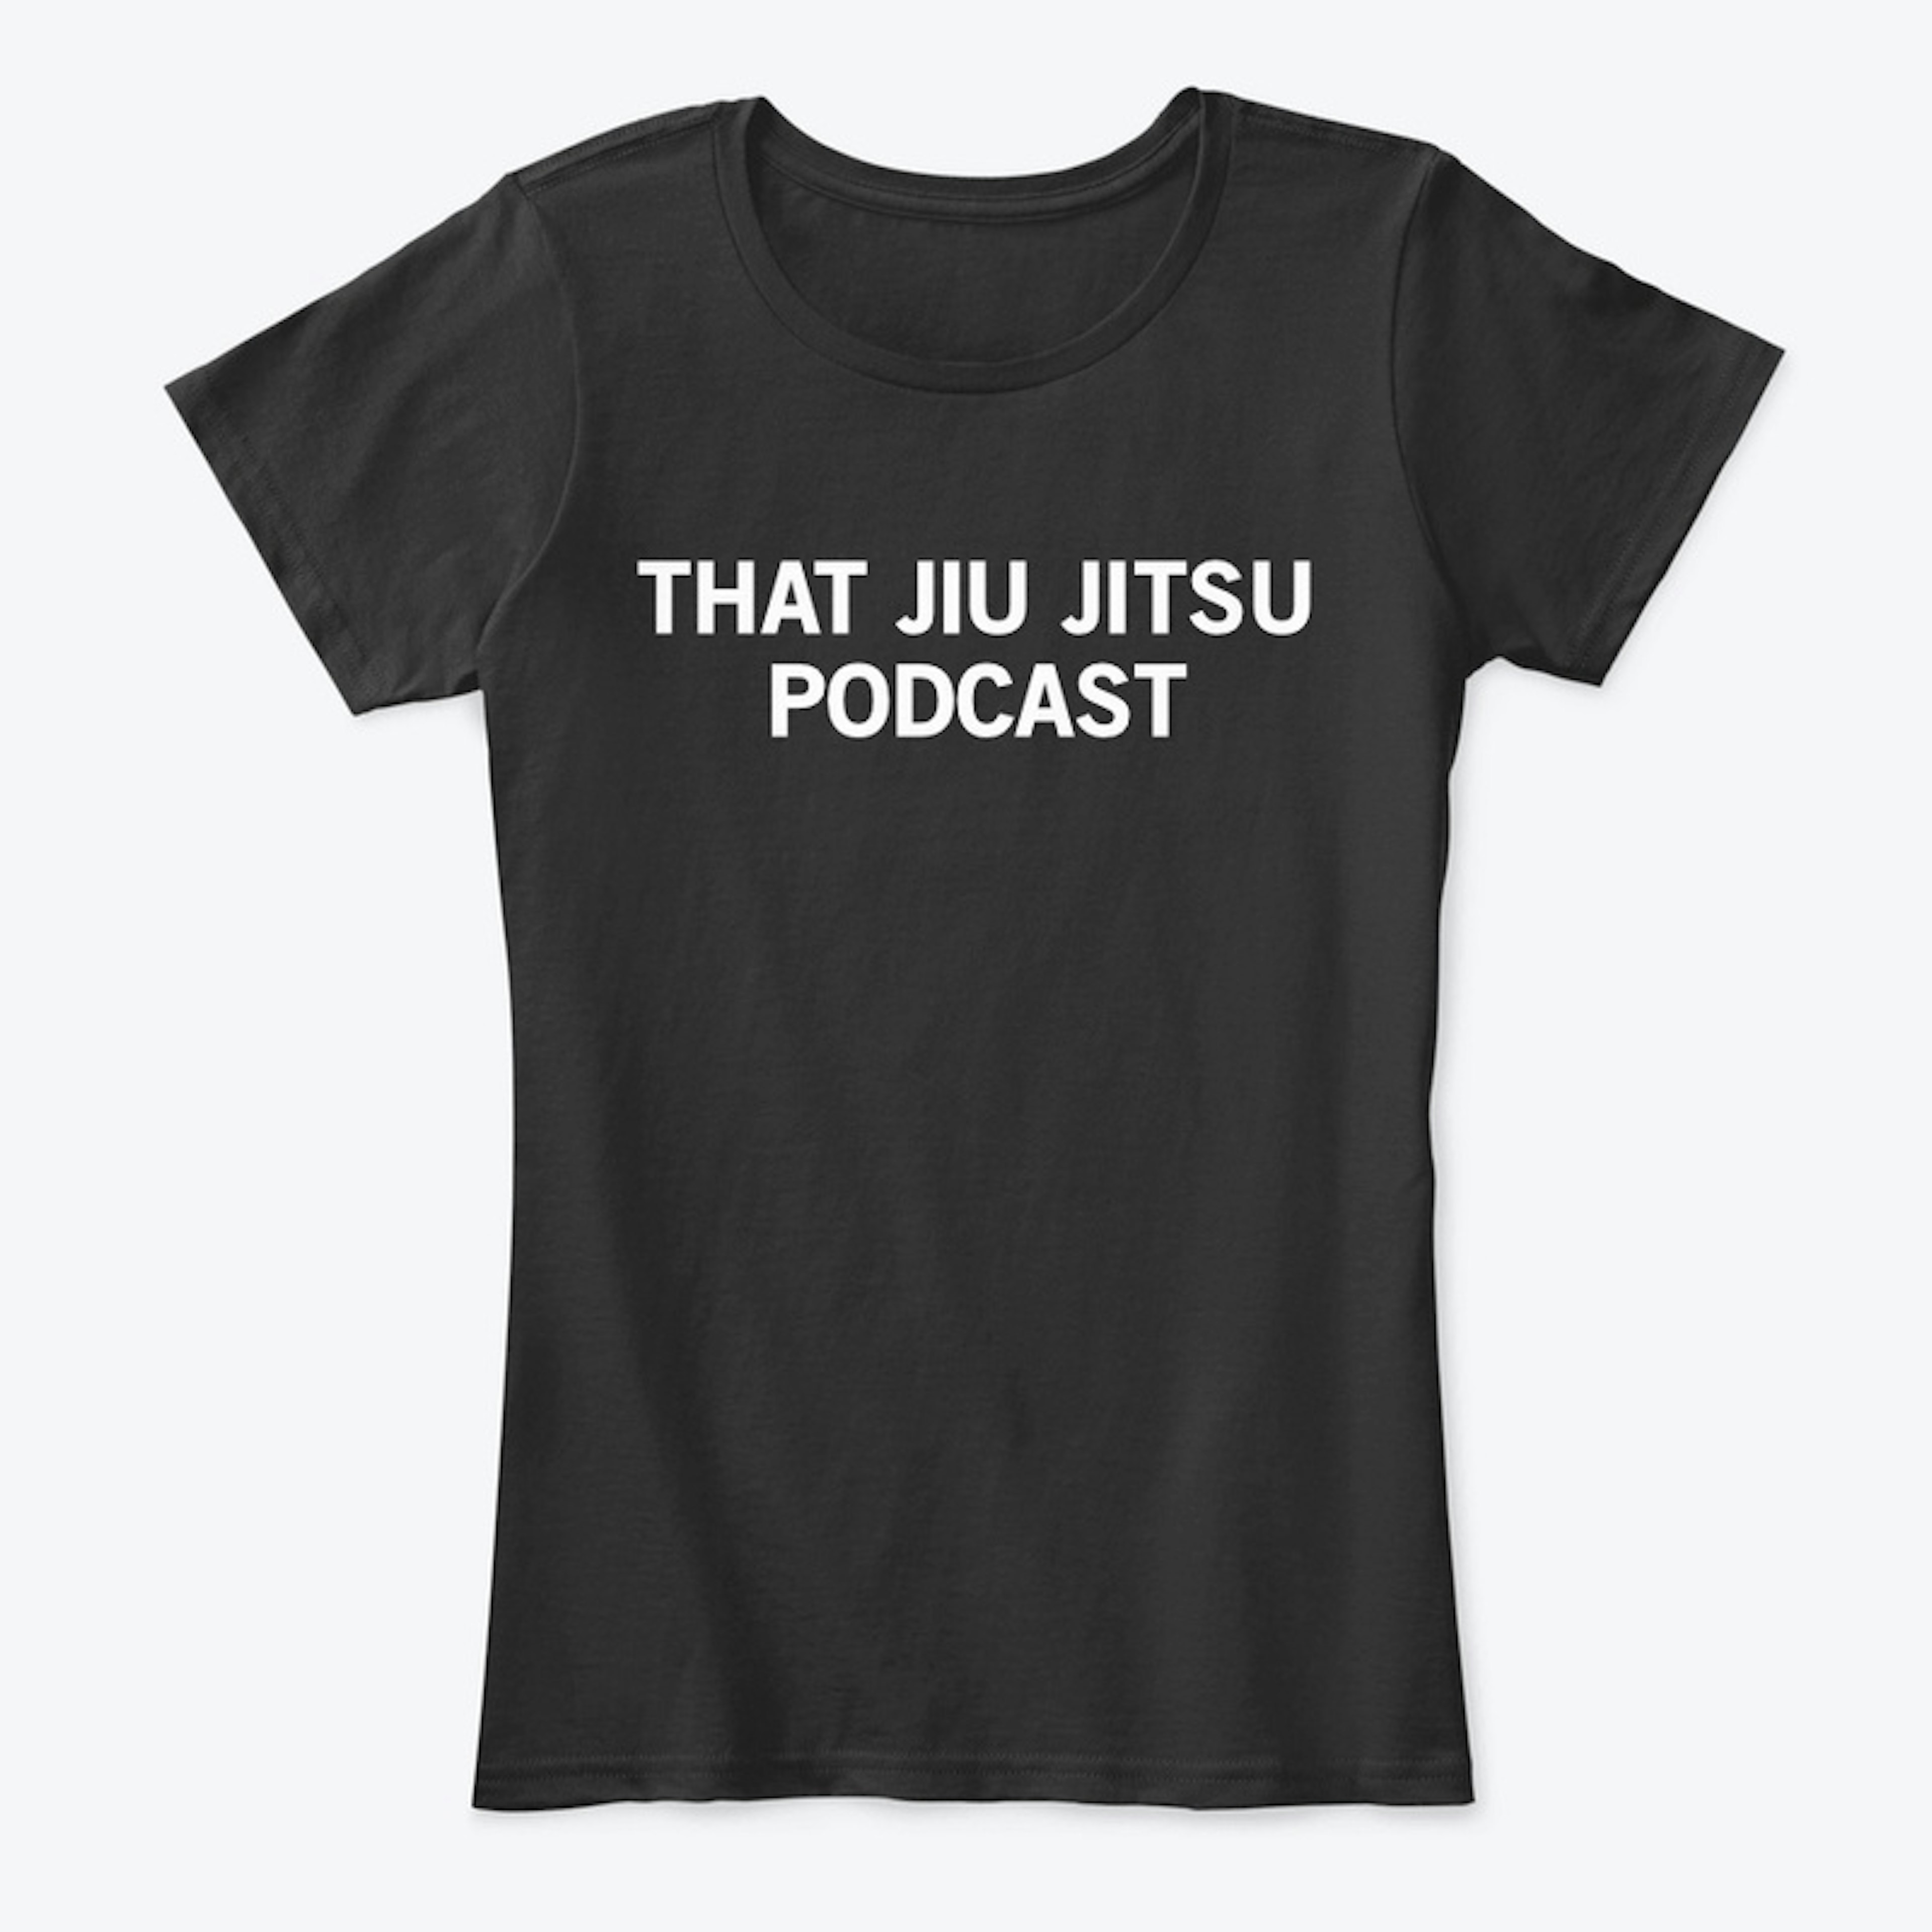 Your Favorite Show's Favorite Shirt